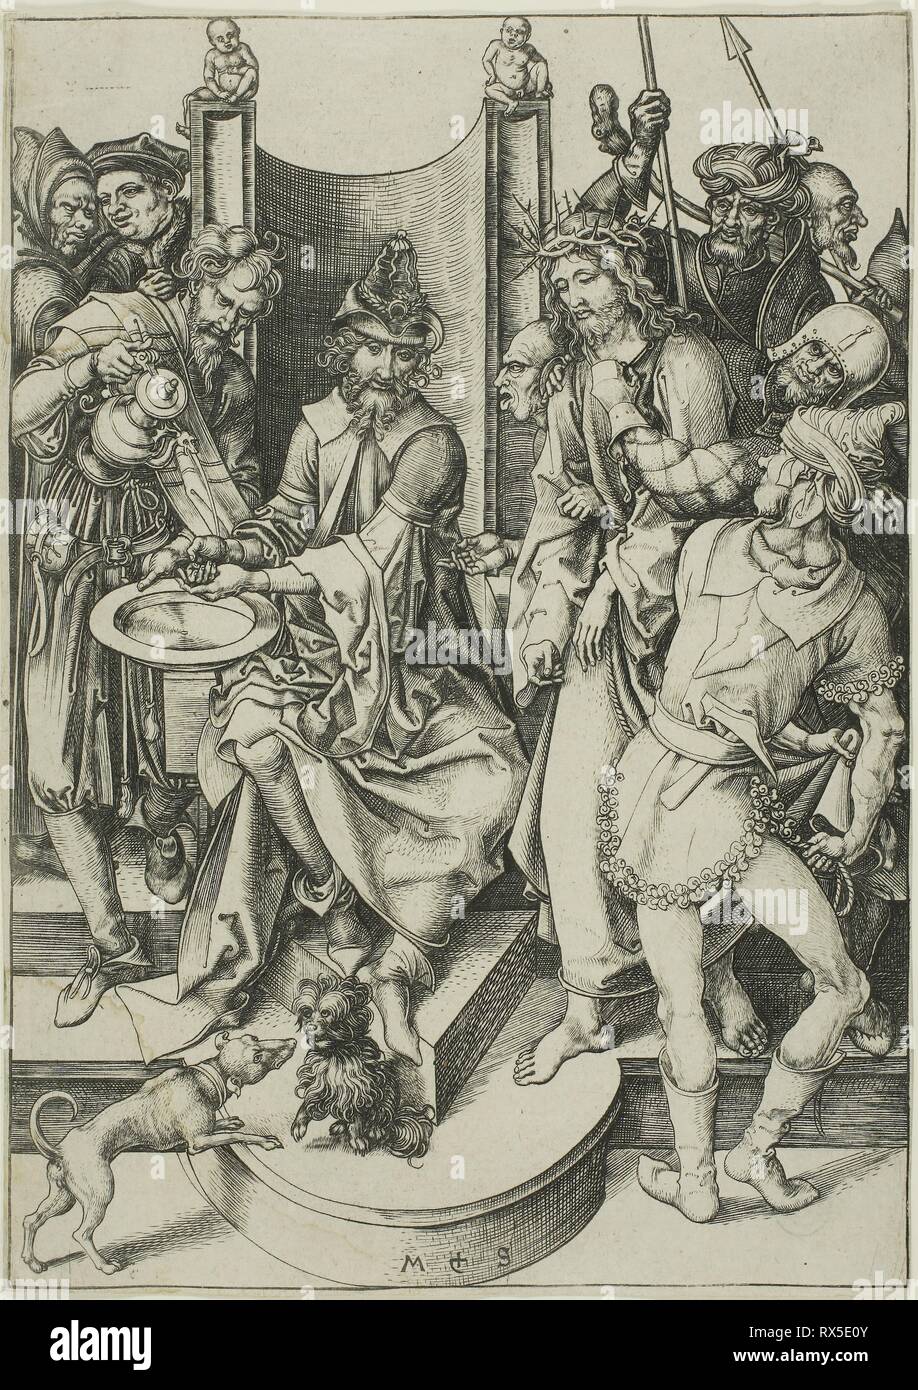 Christ before Pilate, from The Passion. Martin Schongauer; German, c. 1450-1491. Date: 1475-1486. Dimensions: 163 x 115 mm (sheet trimmed within plate mark). Engraving on paper. Origin: Germany. Museum: The Chicago Art Institute. Stock Photo